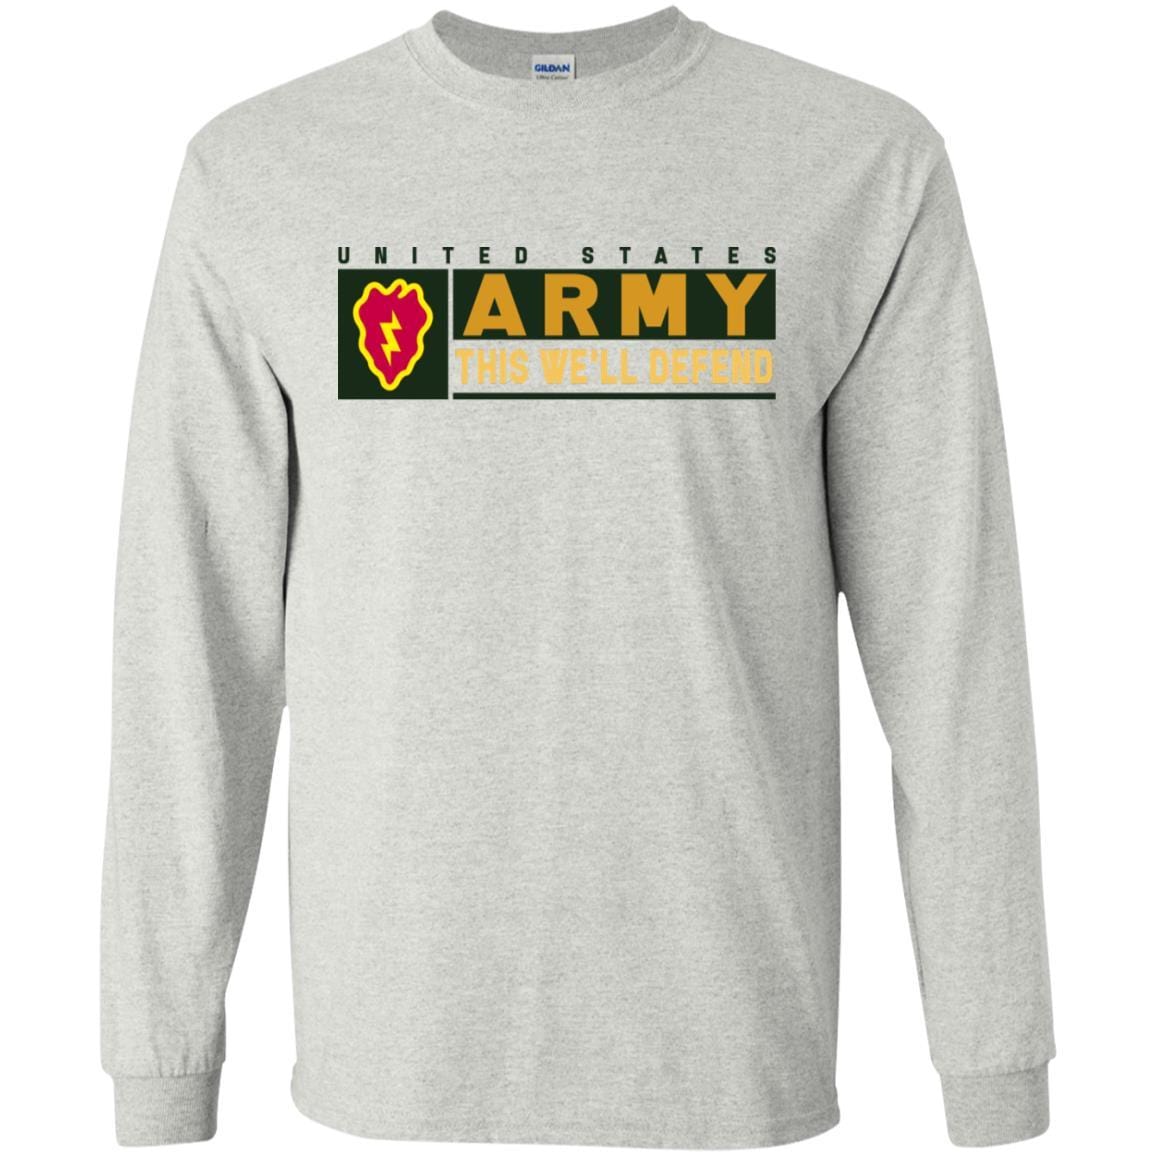 US Army 25th Infantry Division- This We'll Defend T-Shirt On Front For Men-TShirt-Army-Veterans Nation